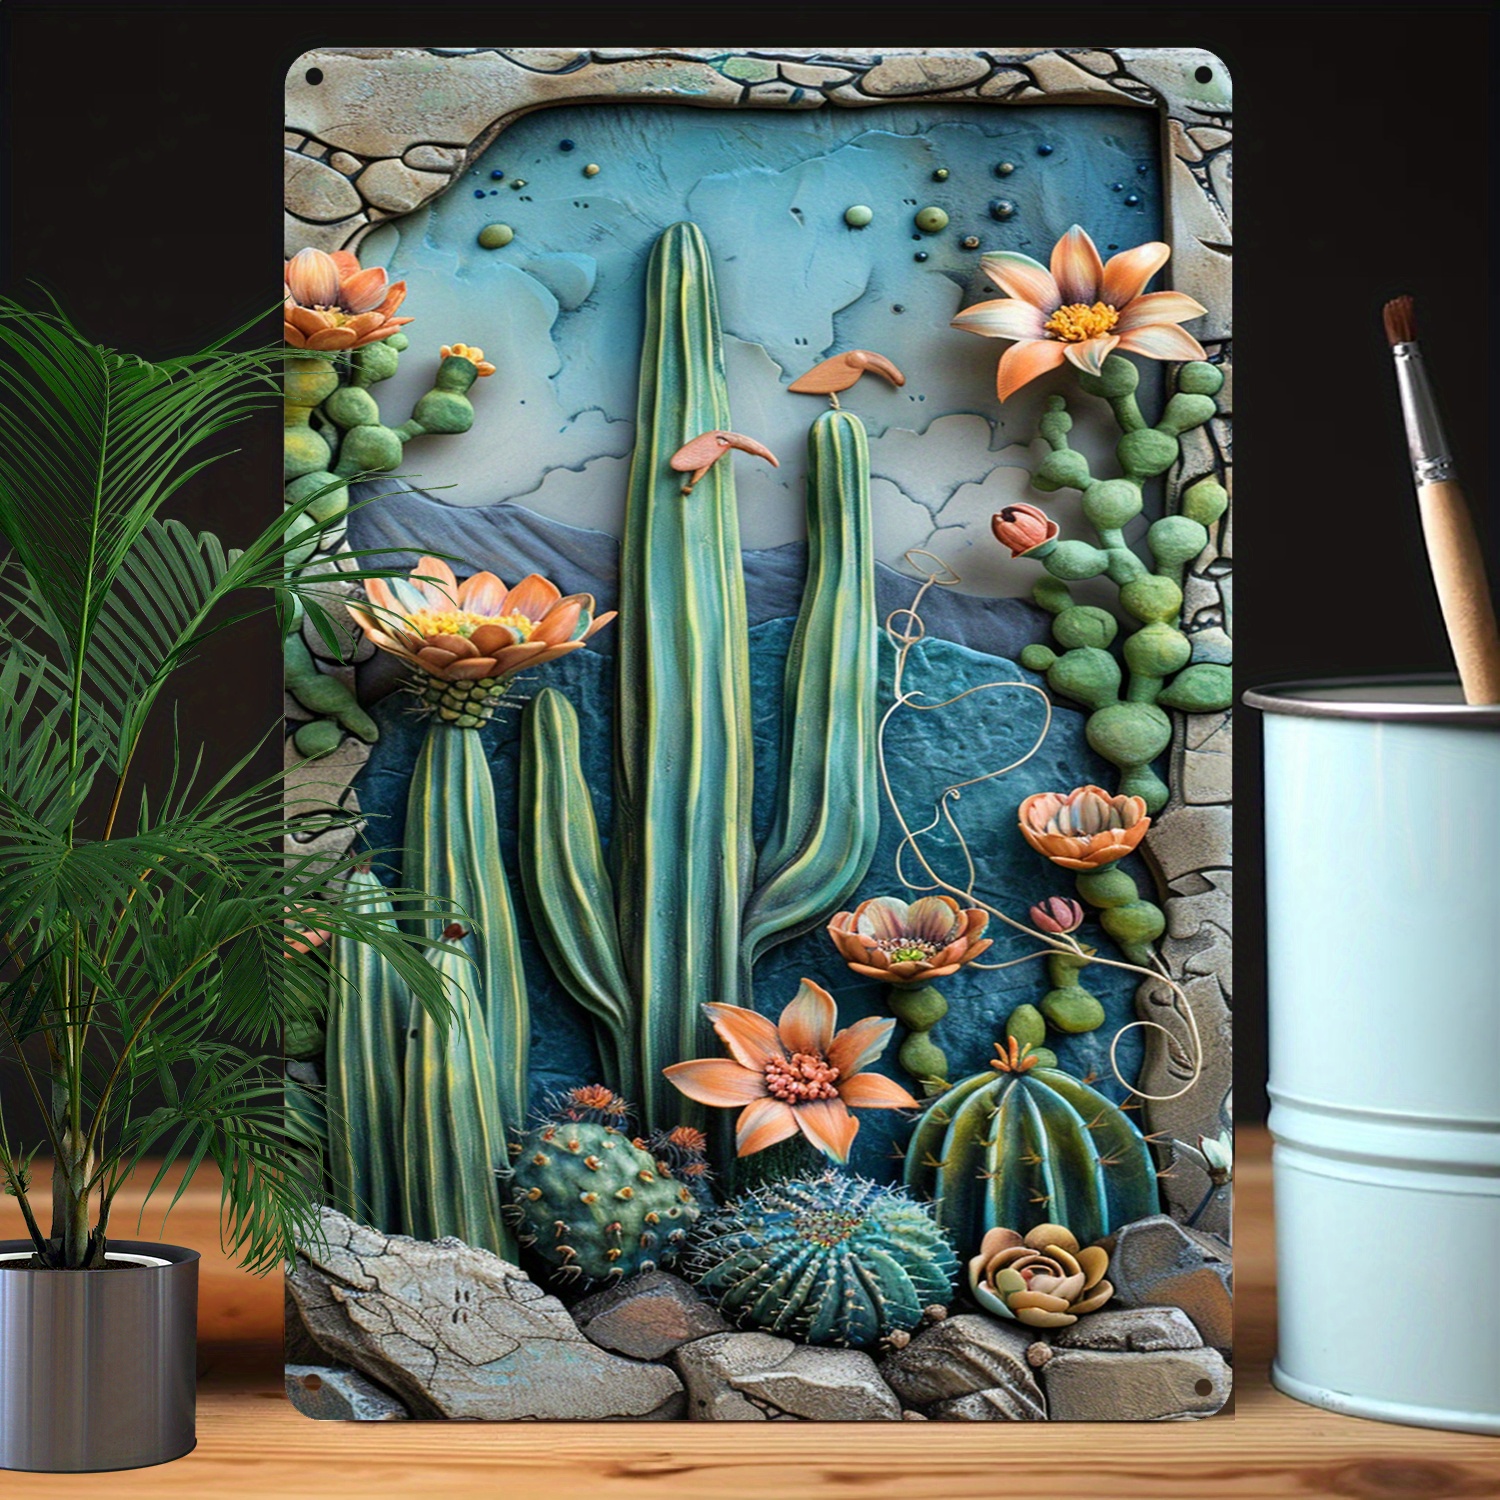 

8x12 Inch 100% Aluminum Metal Tin Sign: Cactus Desert Art - 32% Higher Bending Resistance - Perfect For Home, Office, Or Kitchen Decor